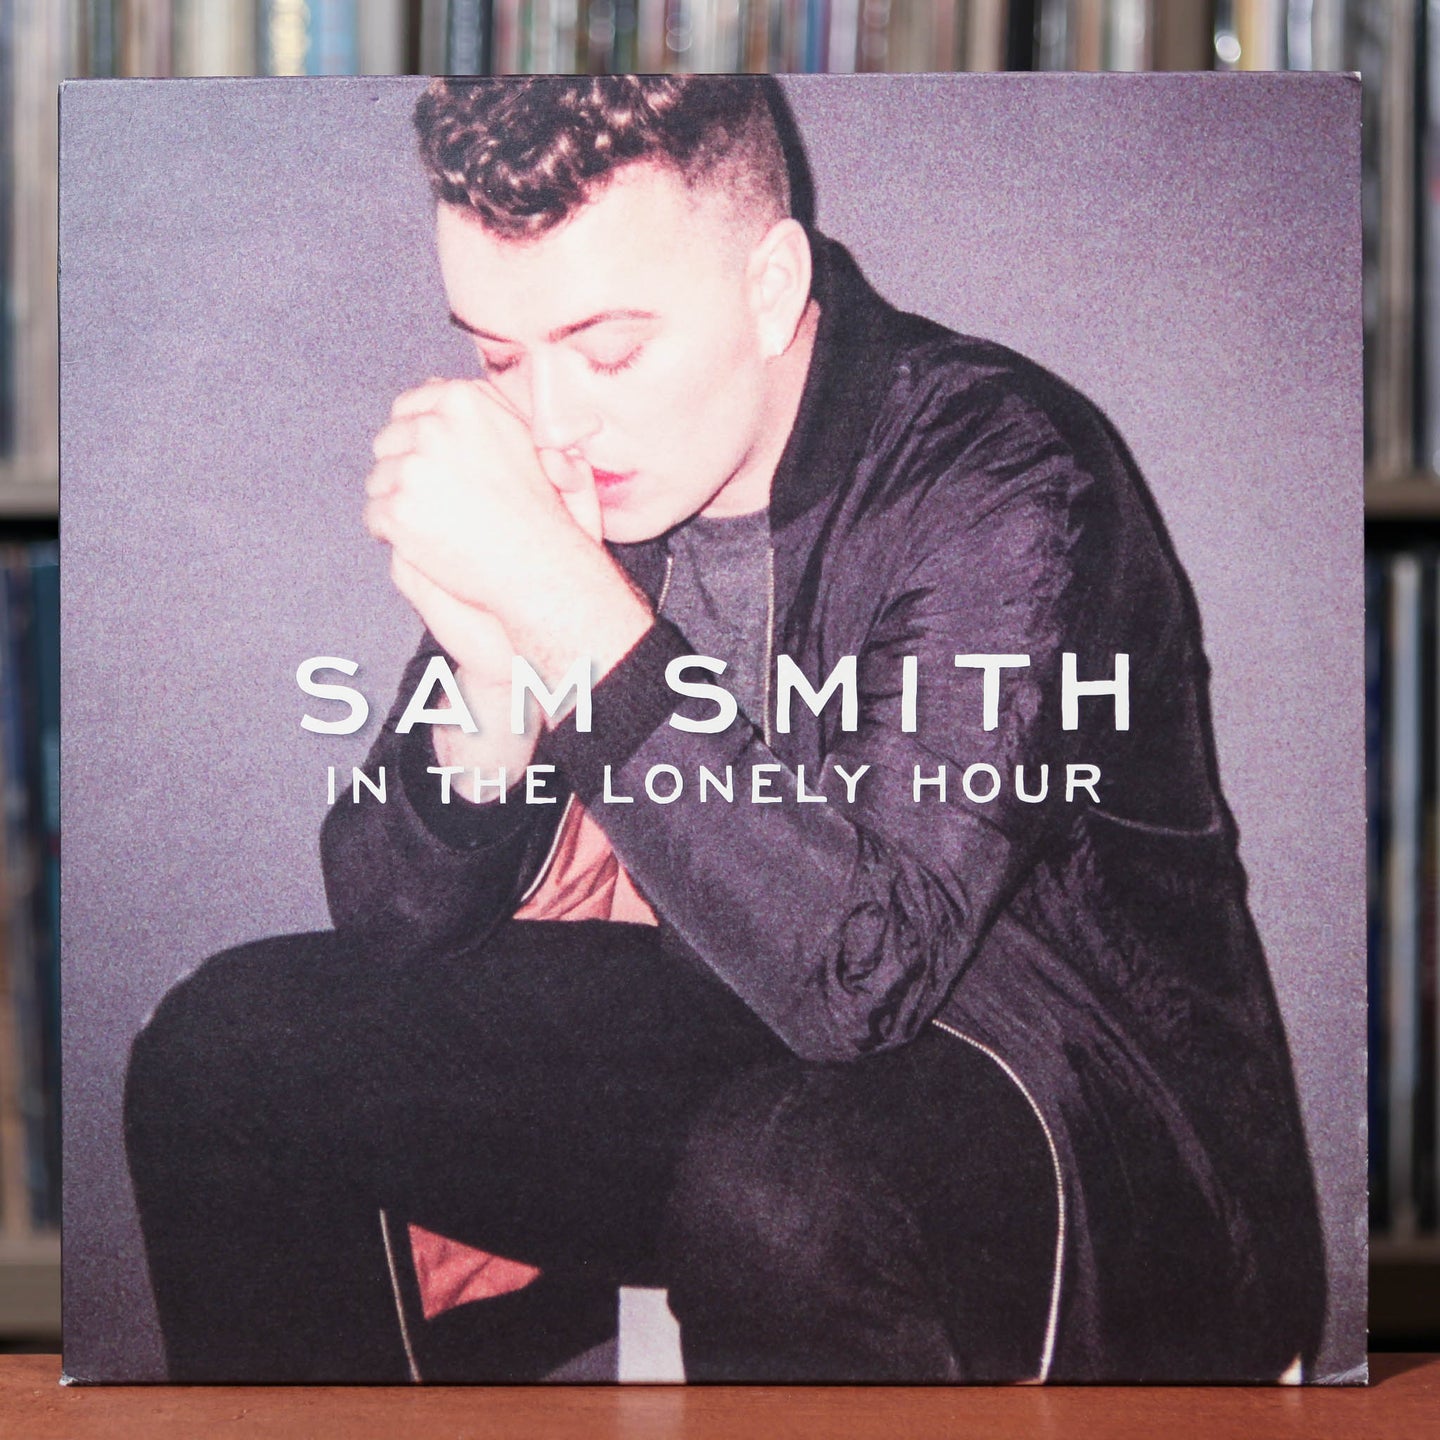 Sam Smith - In The Lonely Hour - 2014 Capitol, VG+/VG+